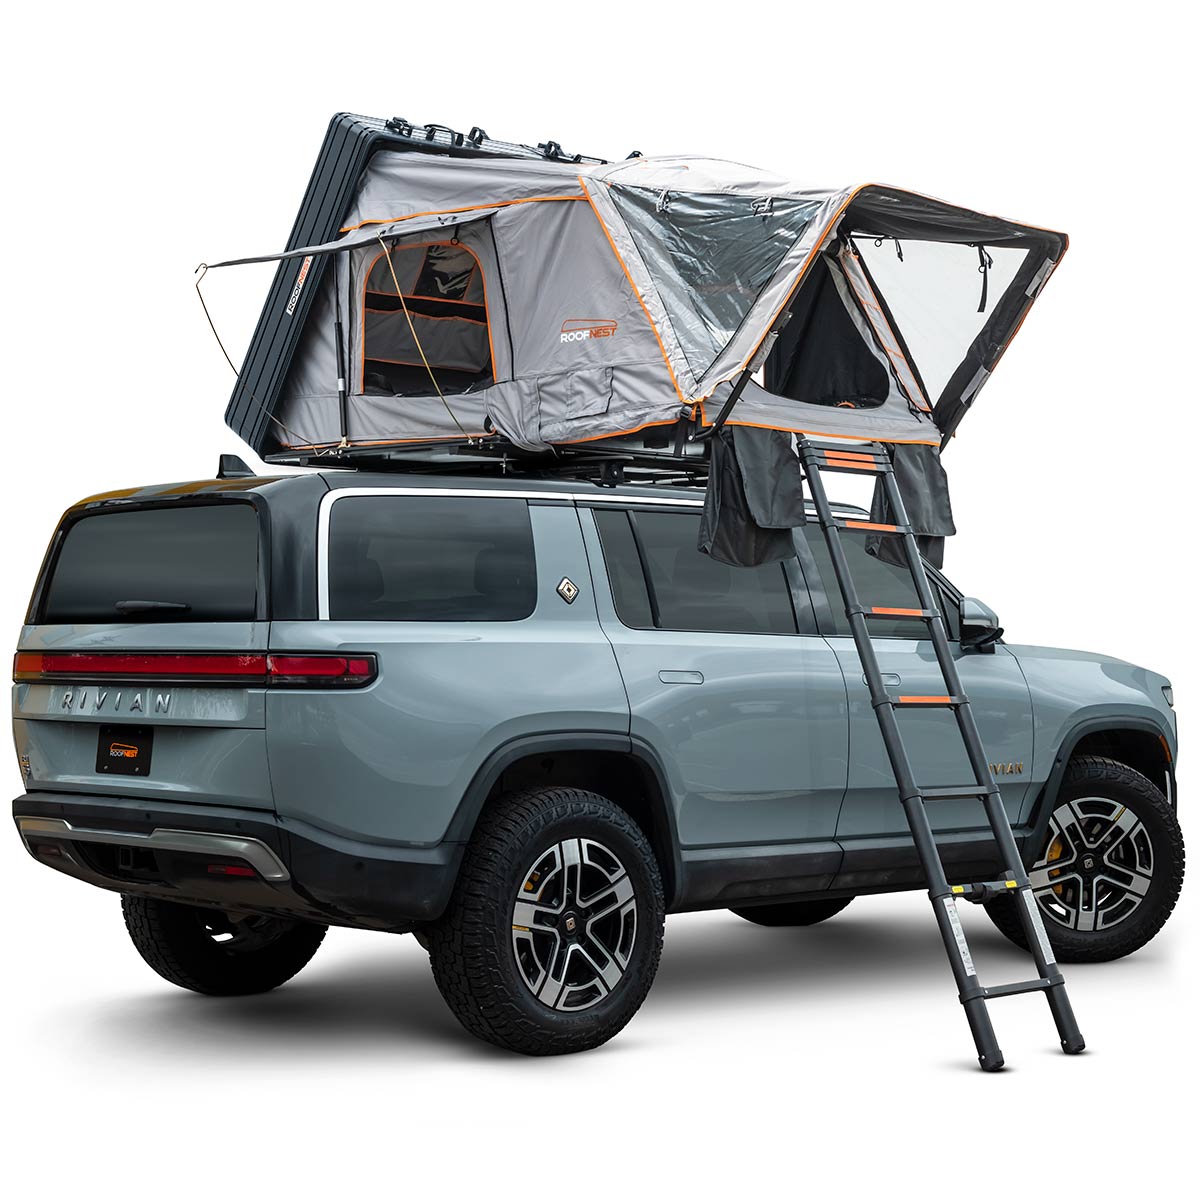 Roofnest's Condor 2 Tents Are the Affordable Options to Off-Grid Living ...